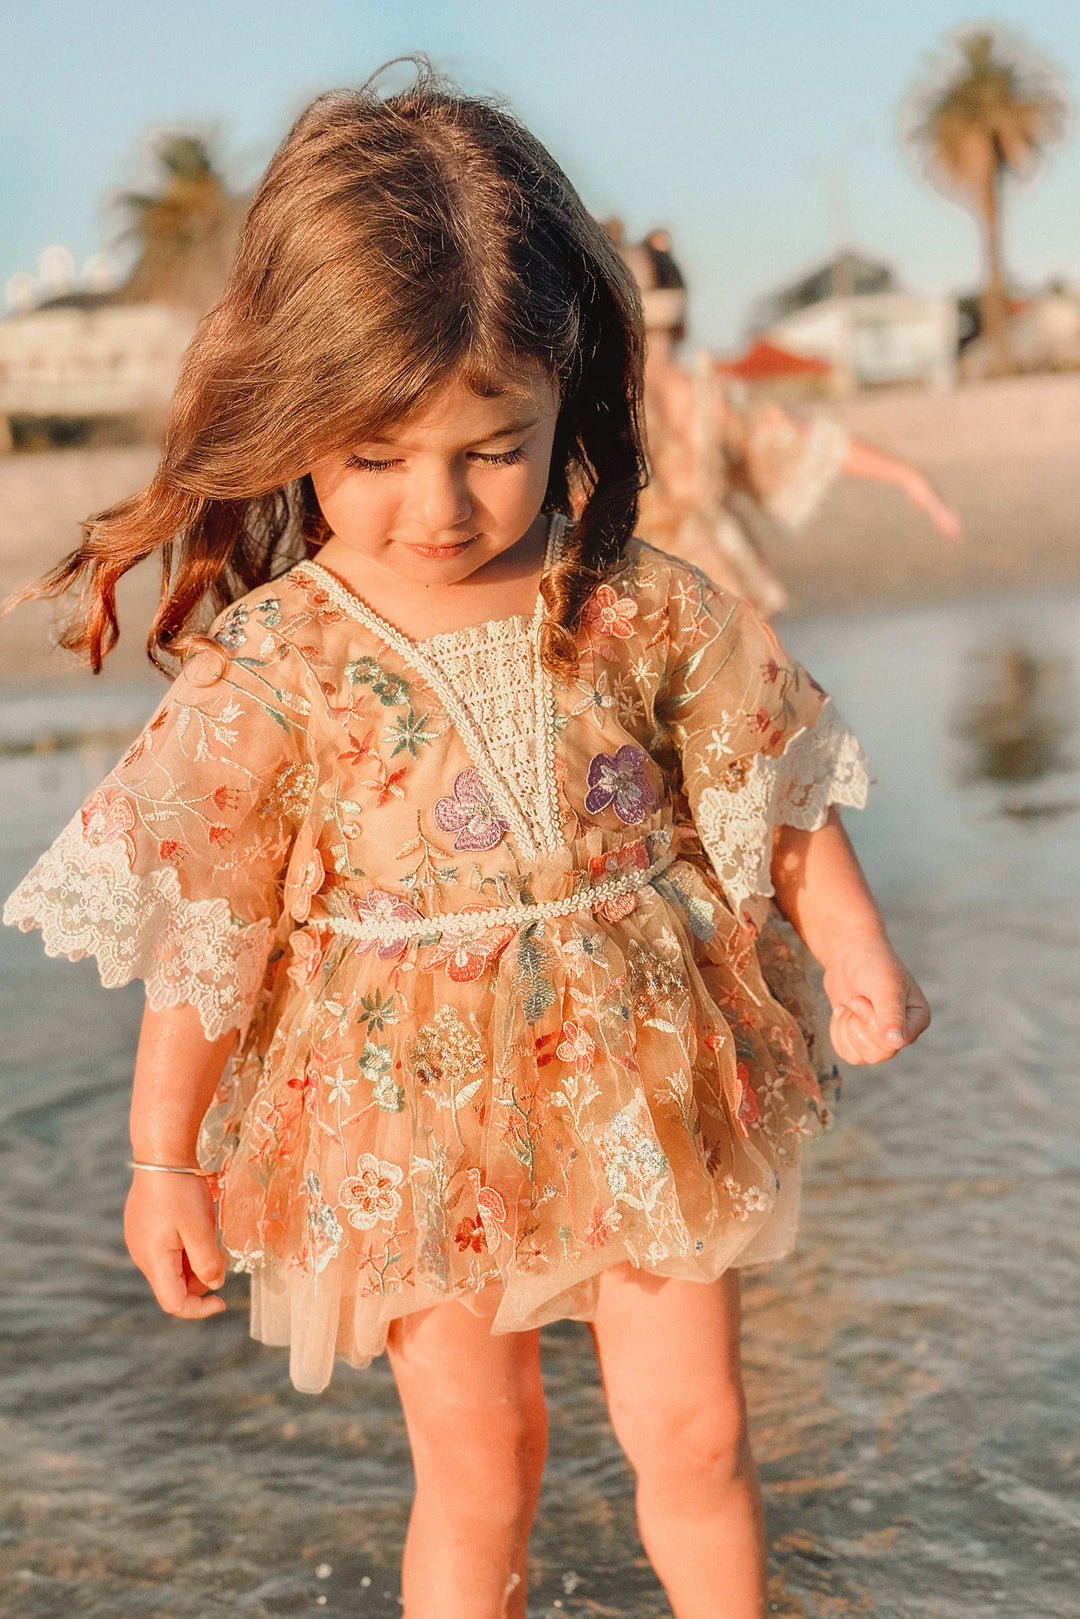 NEW RELEASE: Discover the Magic of Summer with Before & Ever's "Endless Summer" Dress